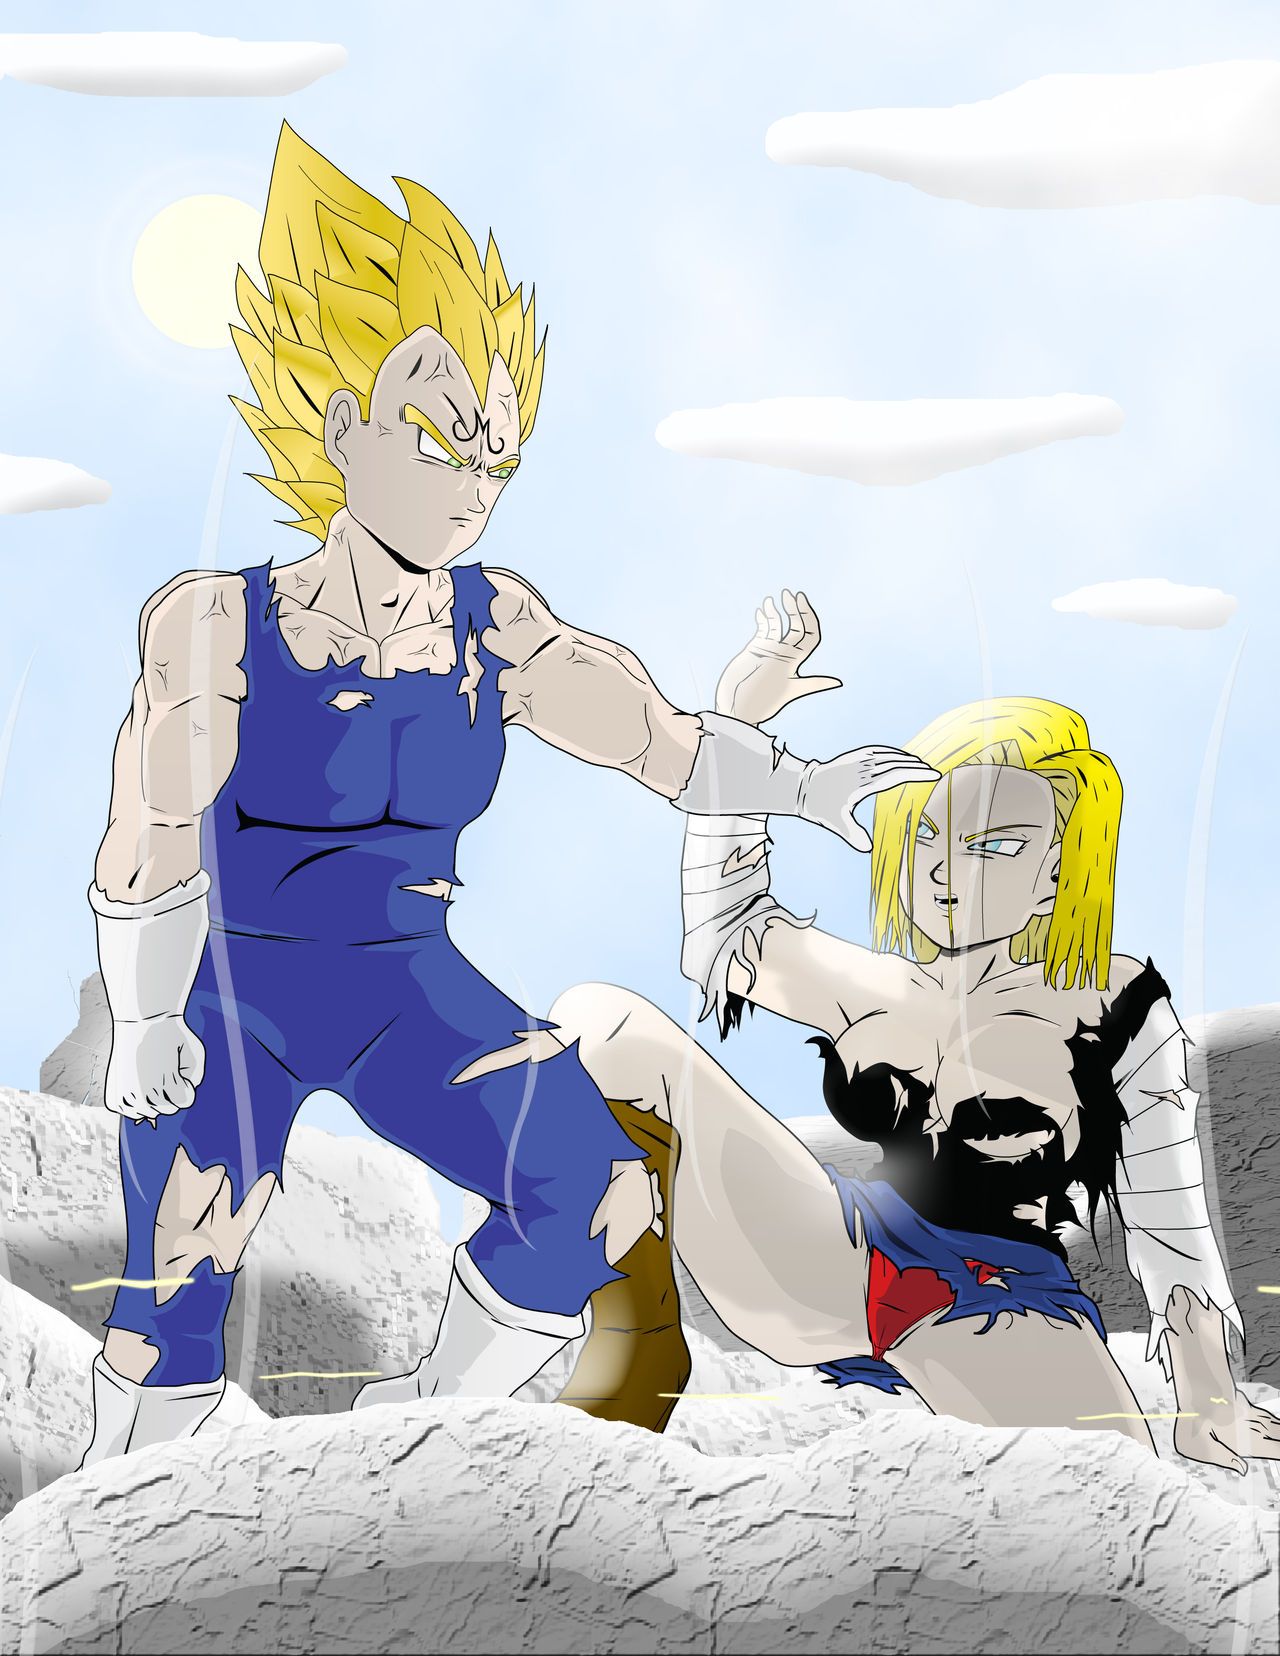 [Rotceh1] Training of Chichi (Dragon Ball Z) [Ongoing] 7